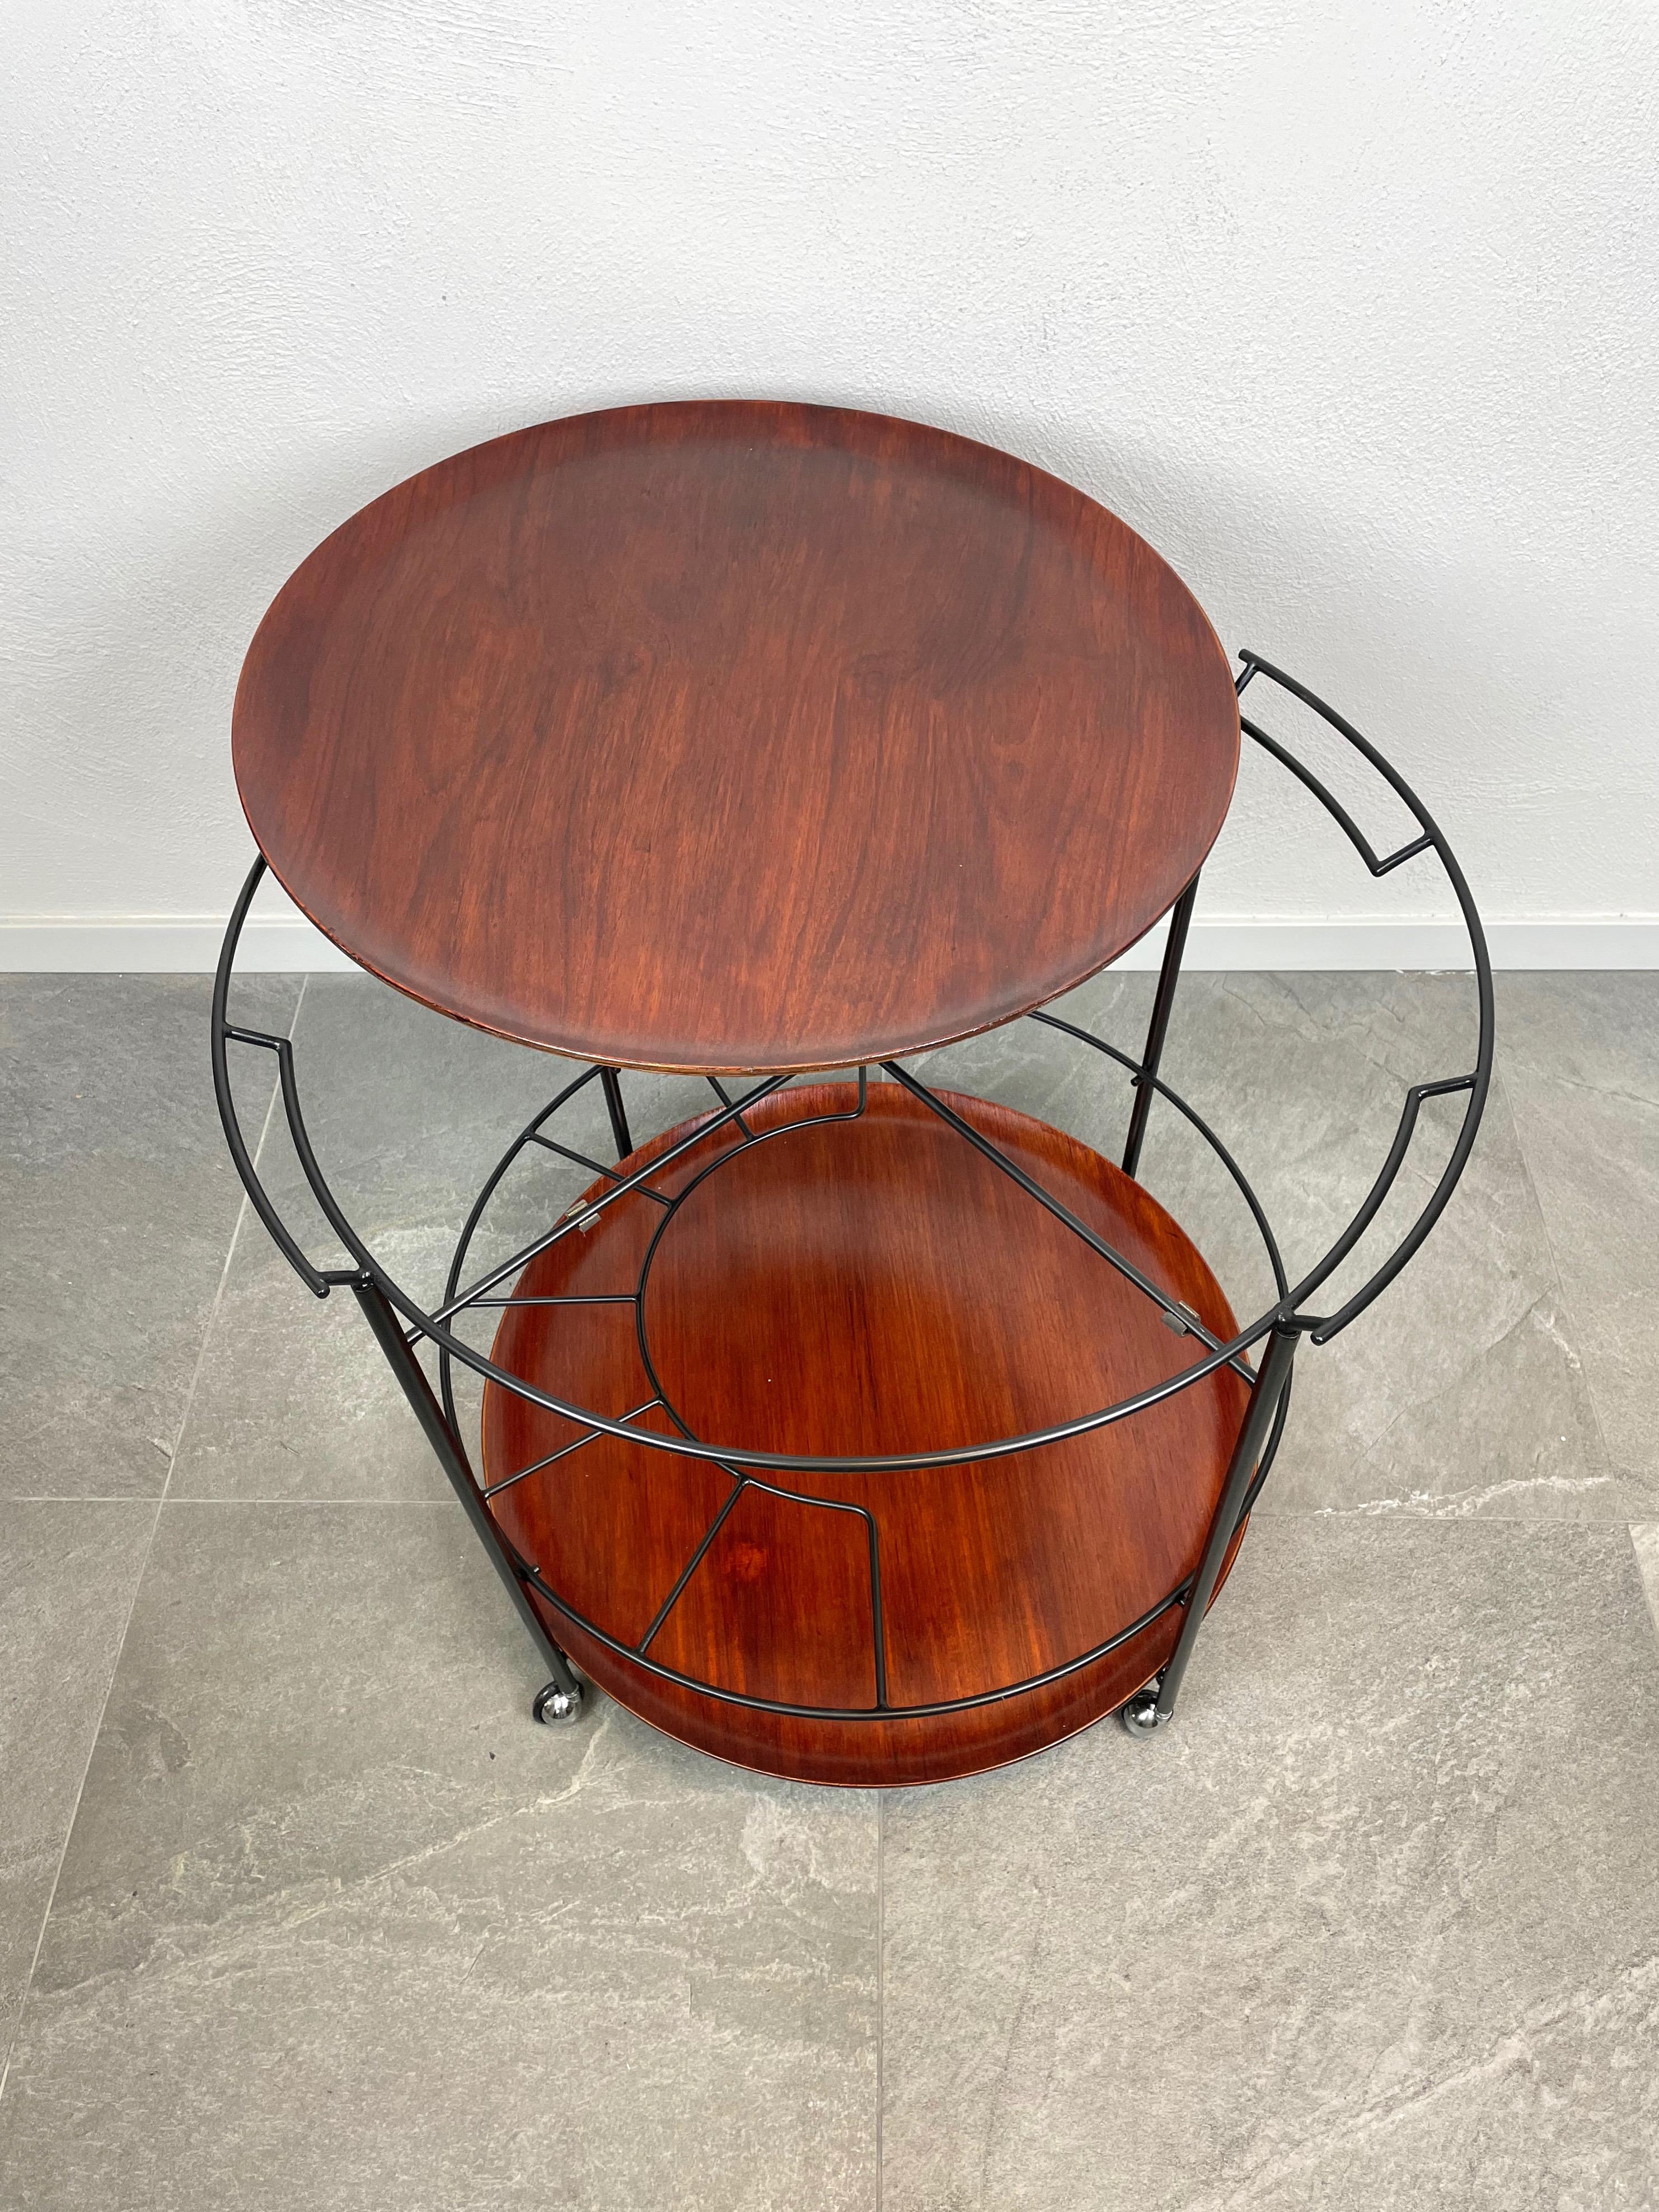 Mid-20th Century Round Serving Cart Tray in Teak and Black Metal, Italy, 1960s For Sale